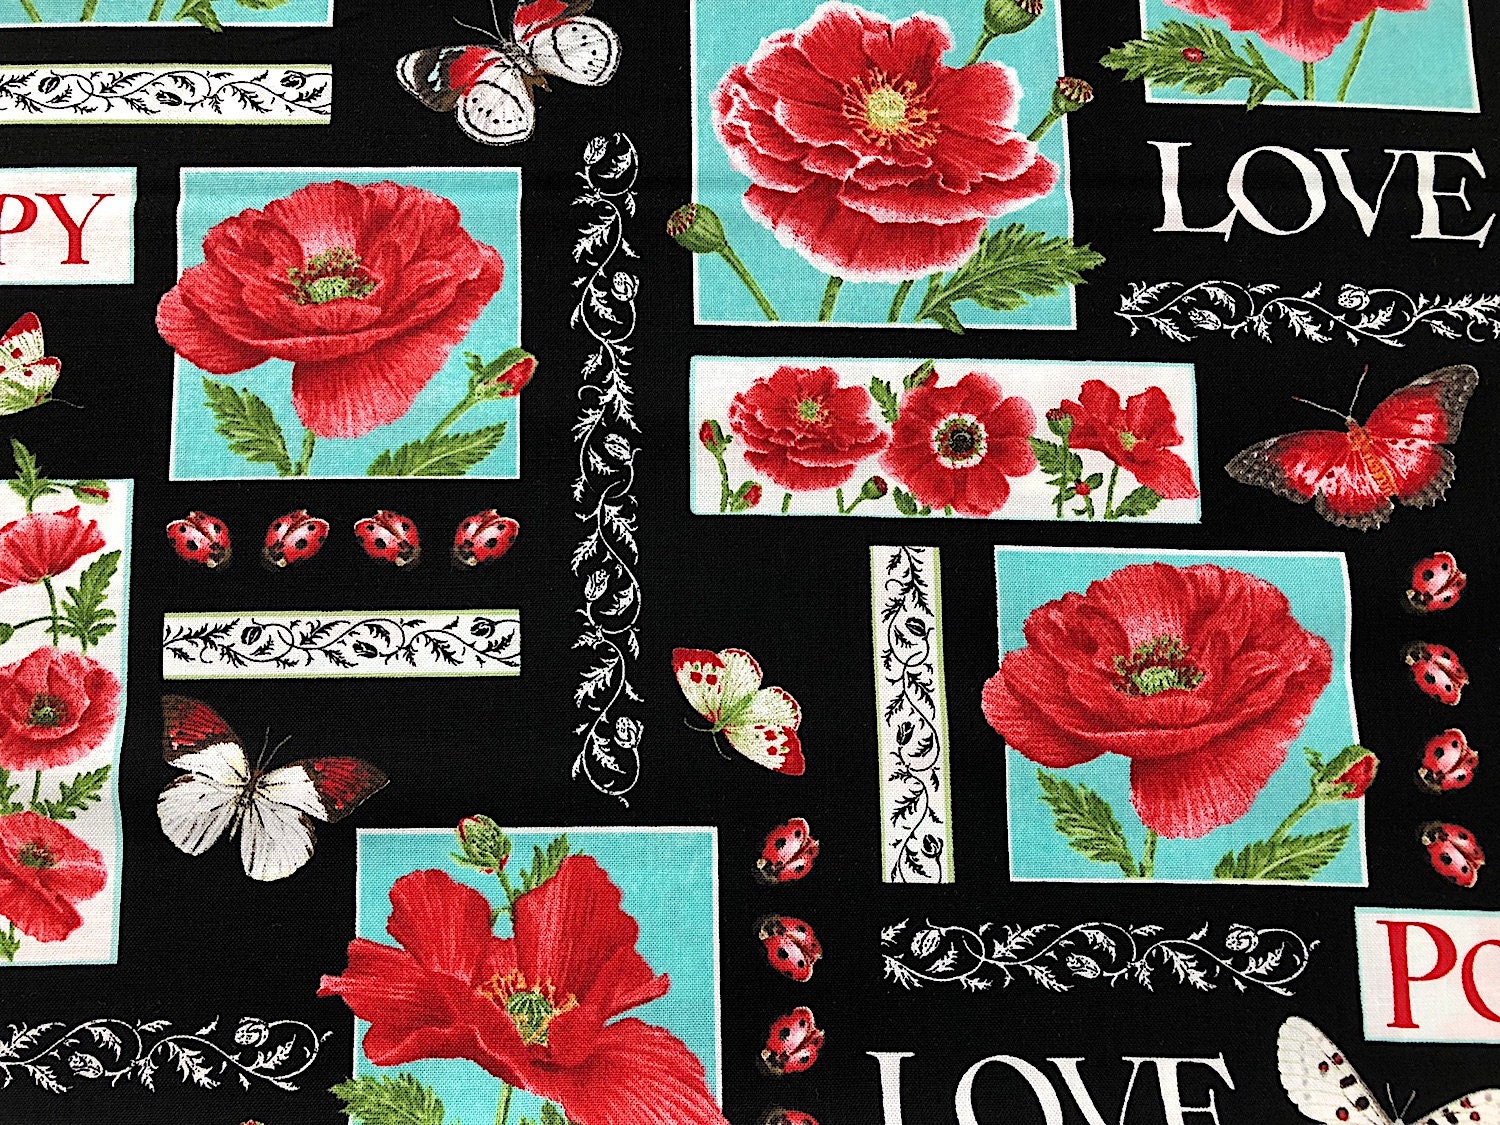 This fabric is part of the Poppy Perfection line. Poppies, butterflies, ladybugs are all over this black fabric. Love and Poppy are also printed on the fabric